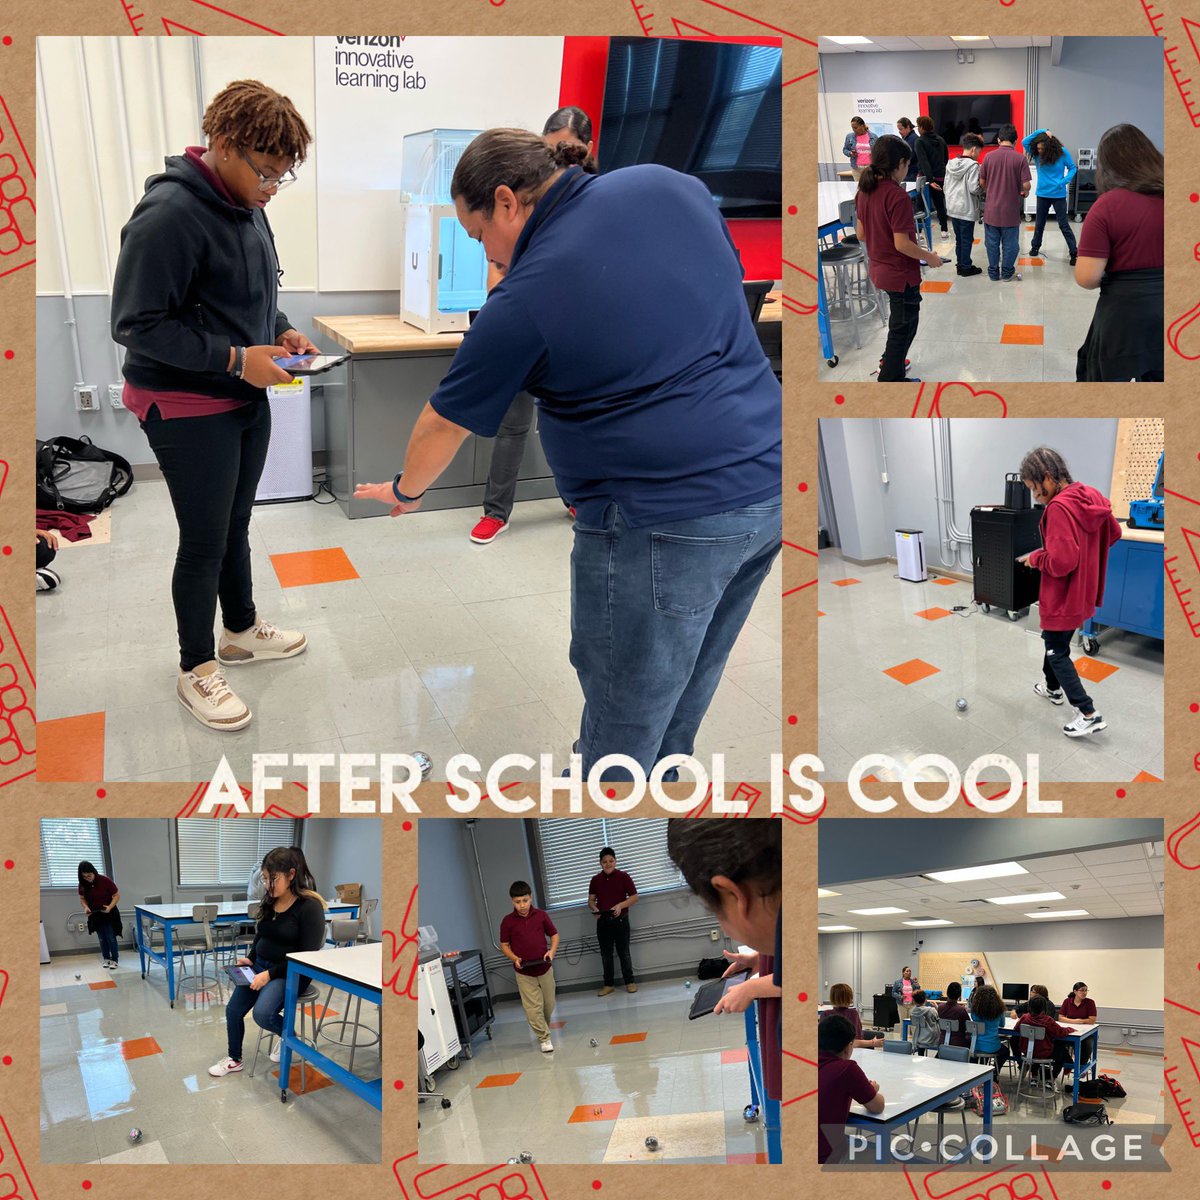 First day of @BakerRipley Young Makers after school program was a hit. Our @NavarroMS_HISD students enjoyed learning how to navigate and control their spheros. #afterschooliscool #innovacion @TechTisa @alopezhisd @HISD_Wraparound